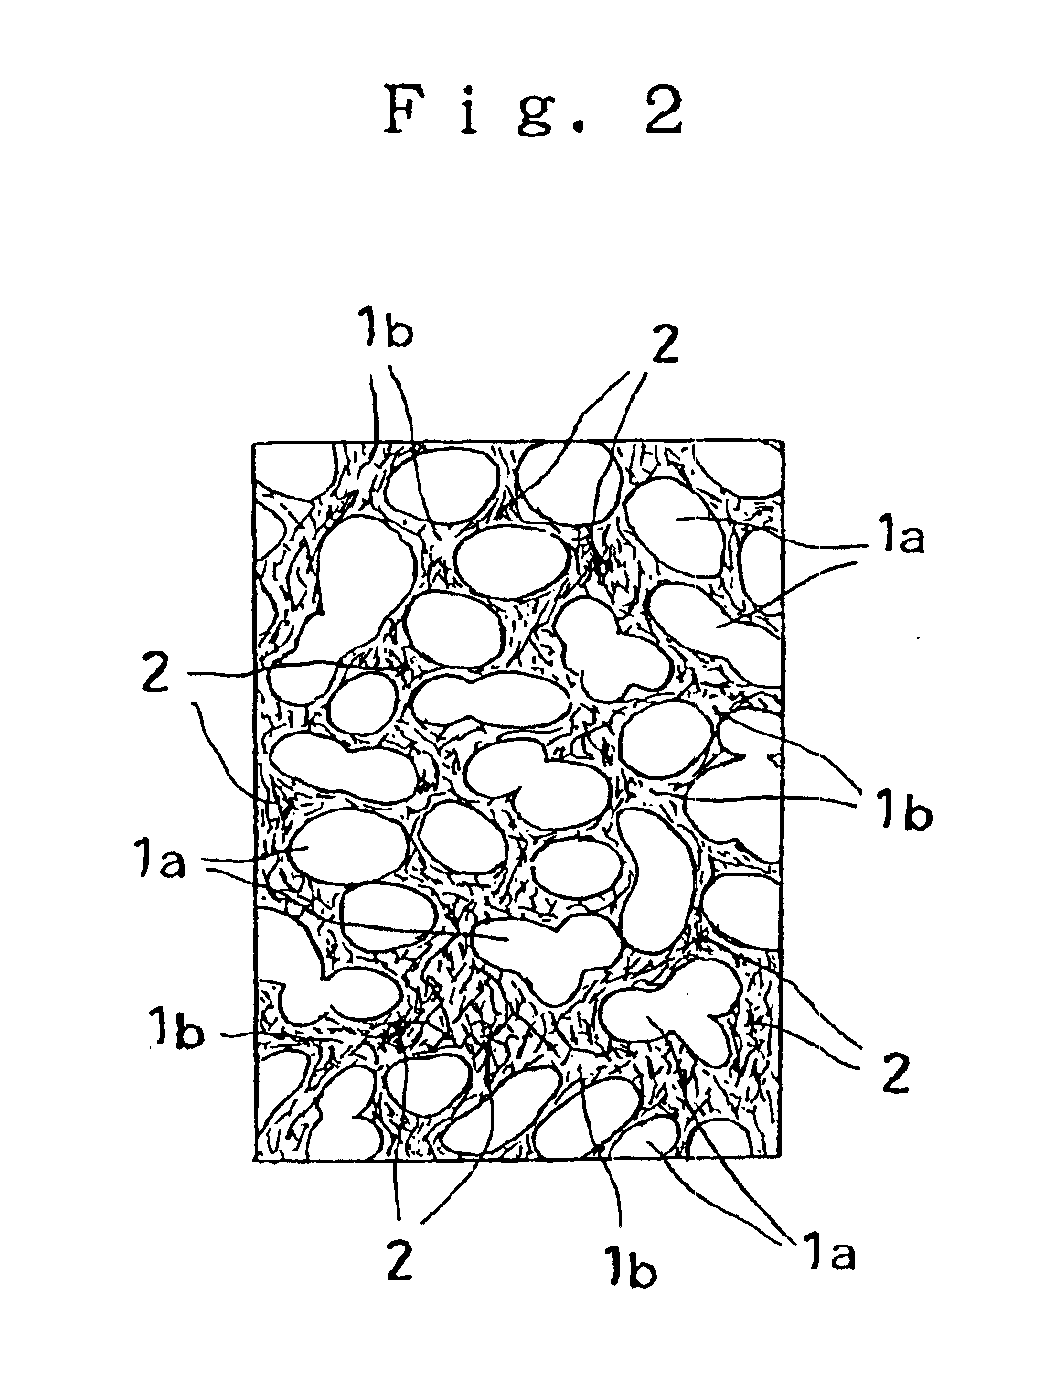 Method for producing a composite metal product